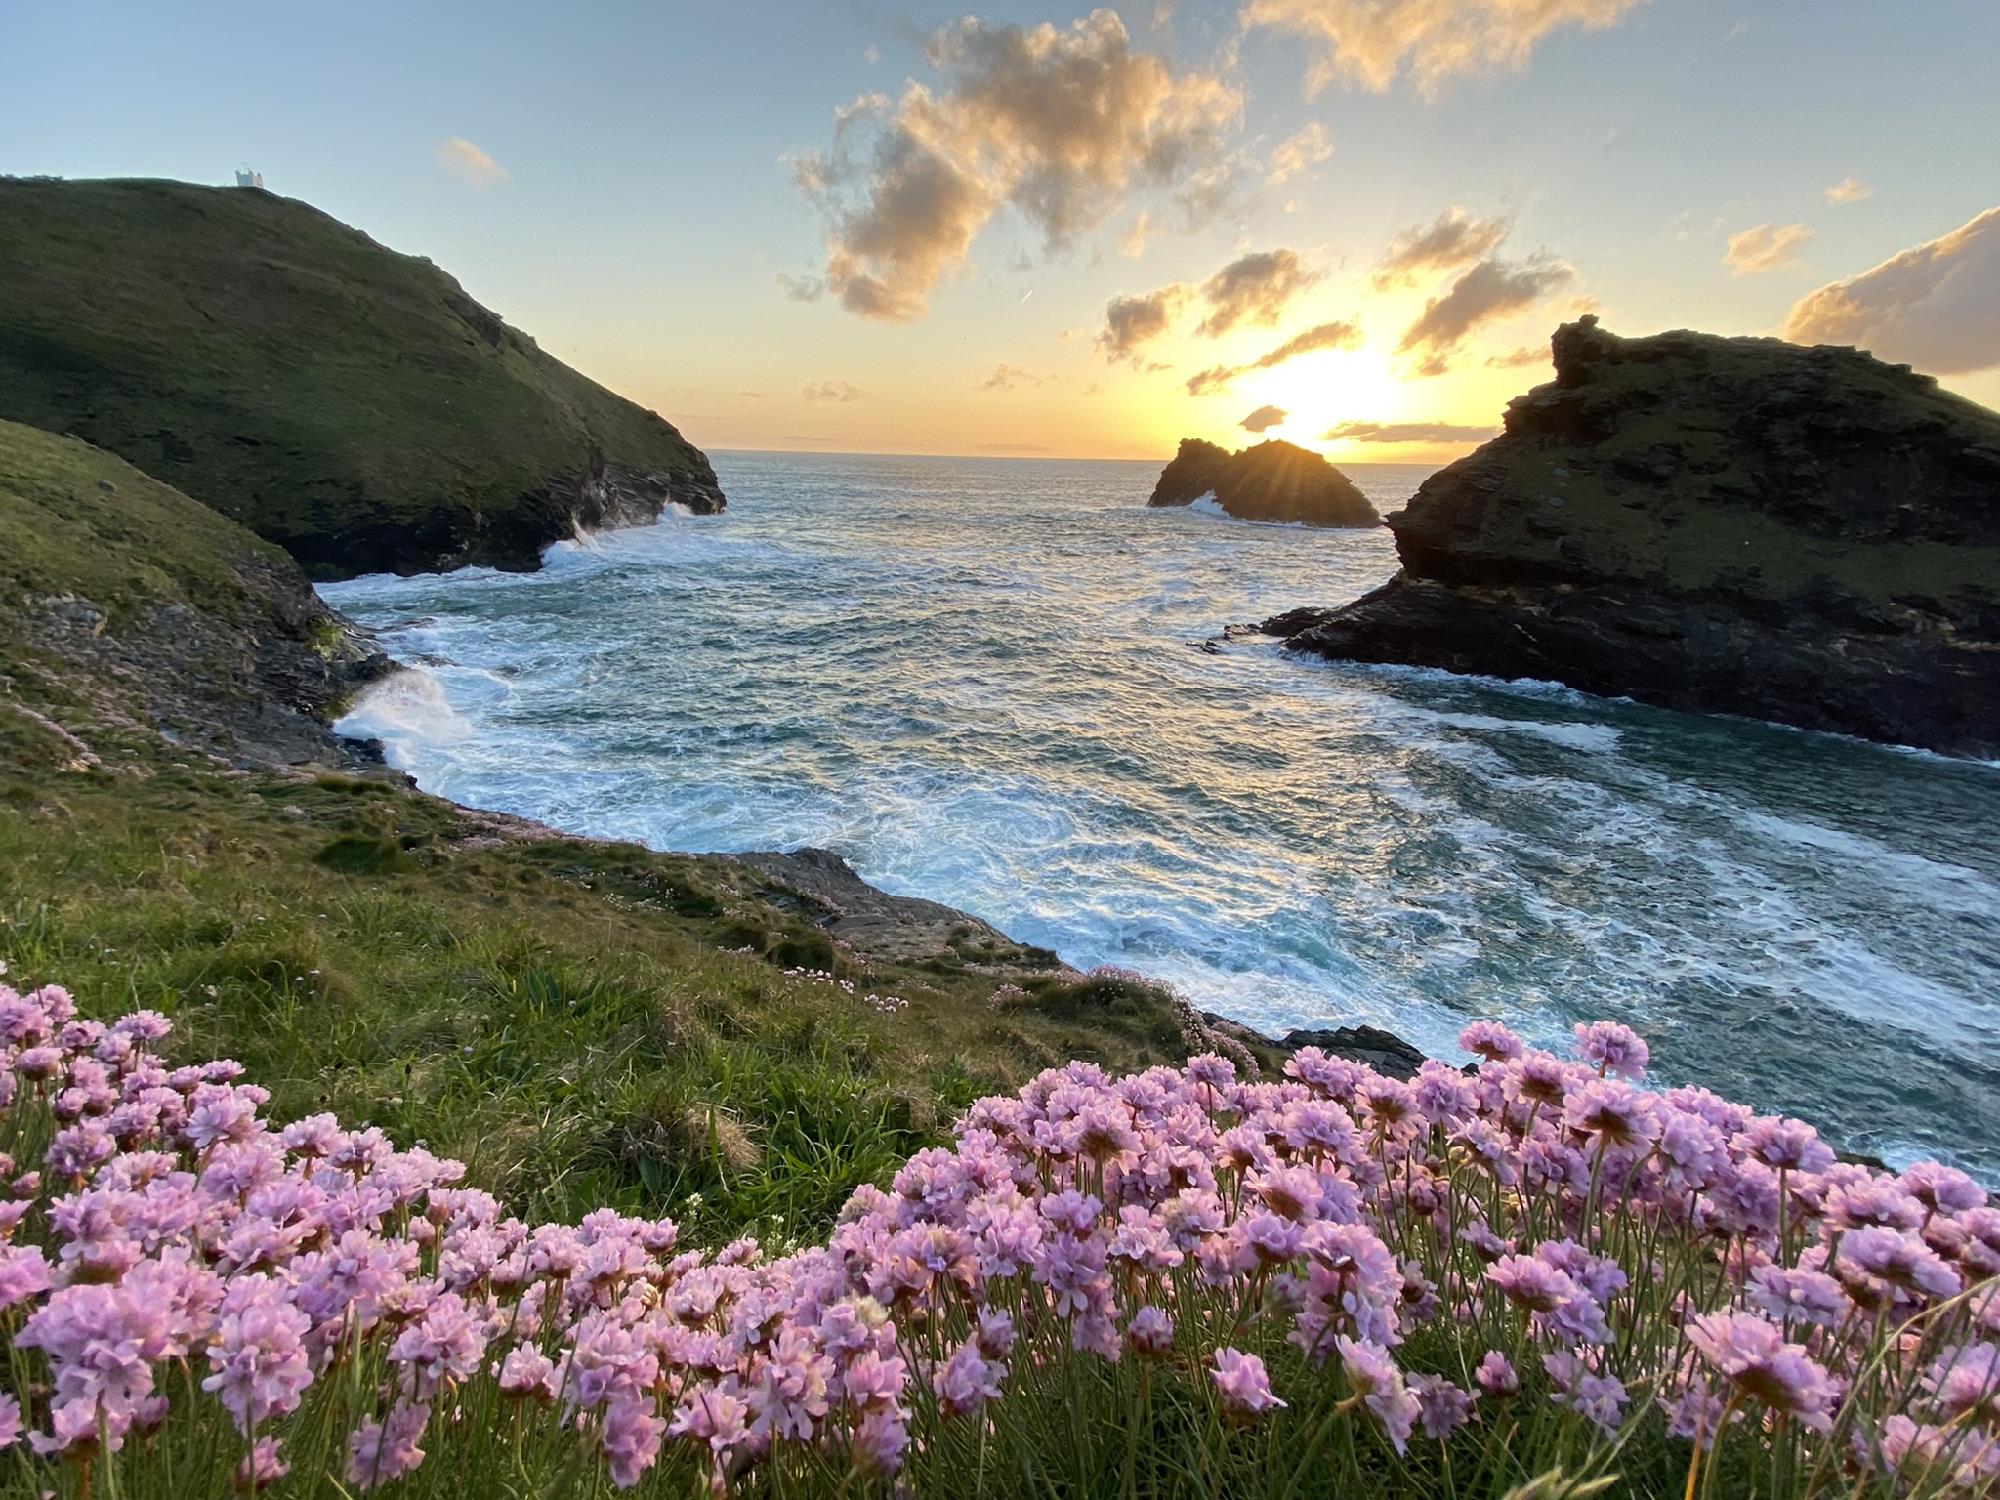 Sea pinks glow as the sun sets over Boscastle harbour near Polrunny Farm holiday cottages